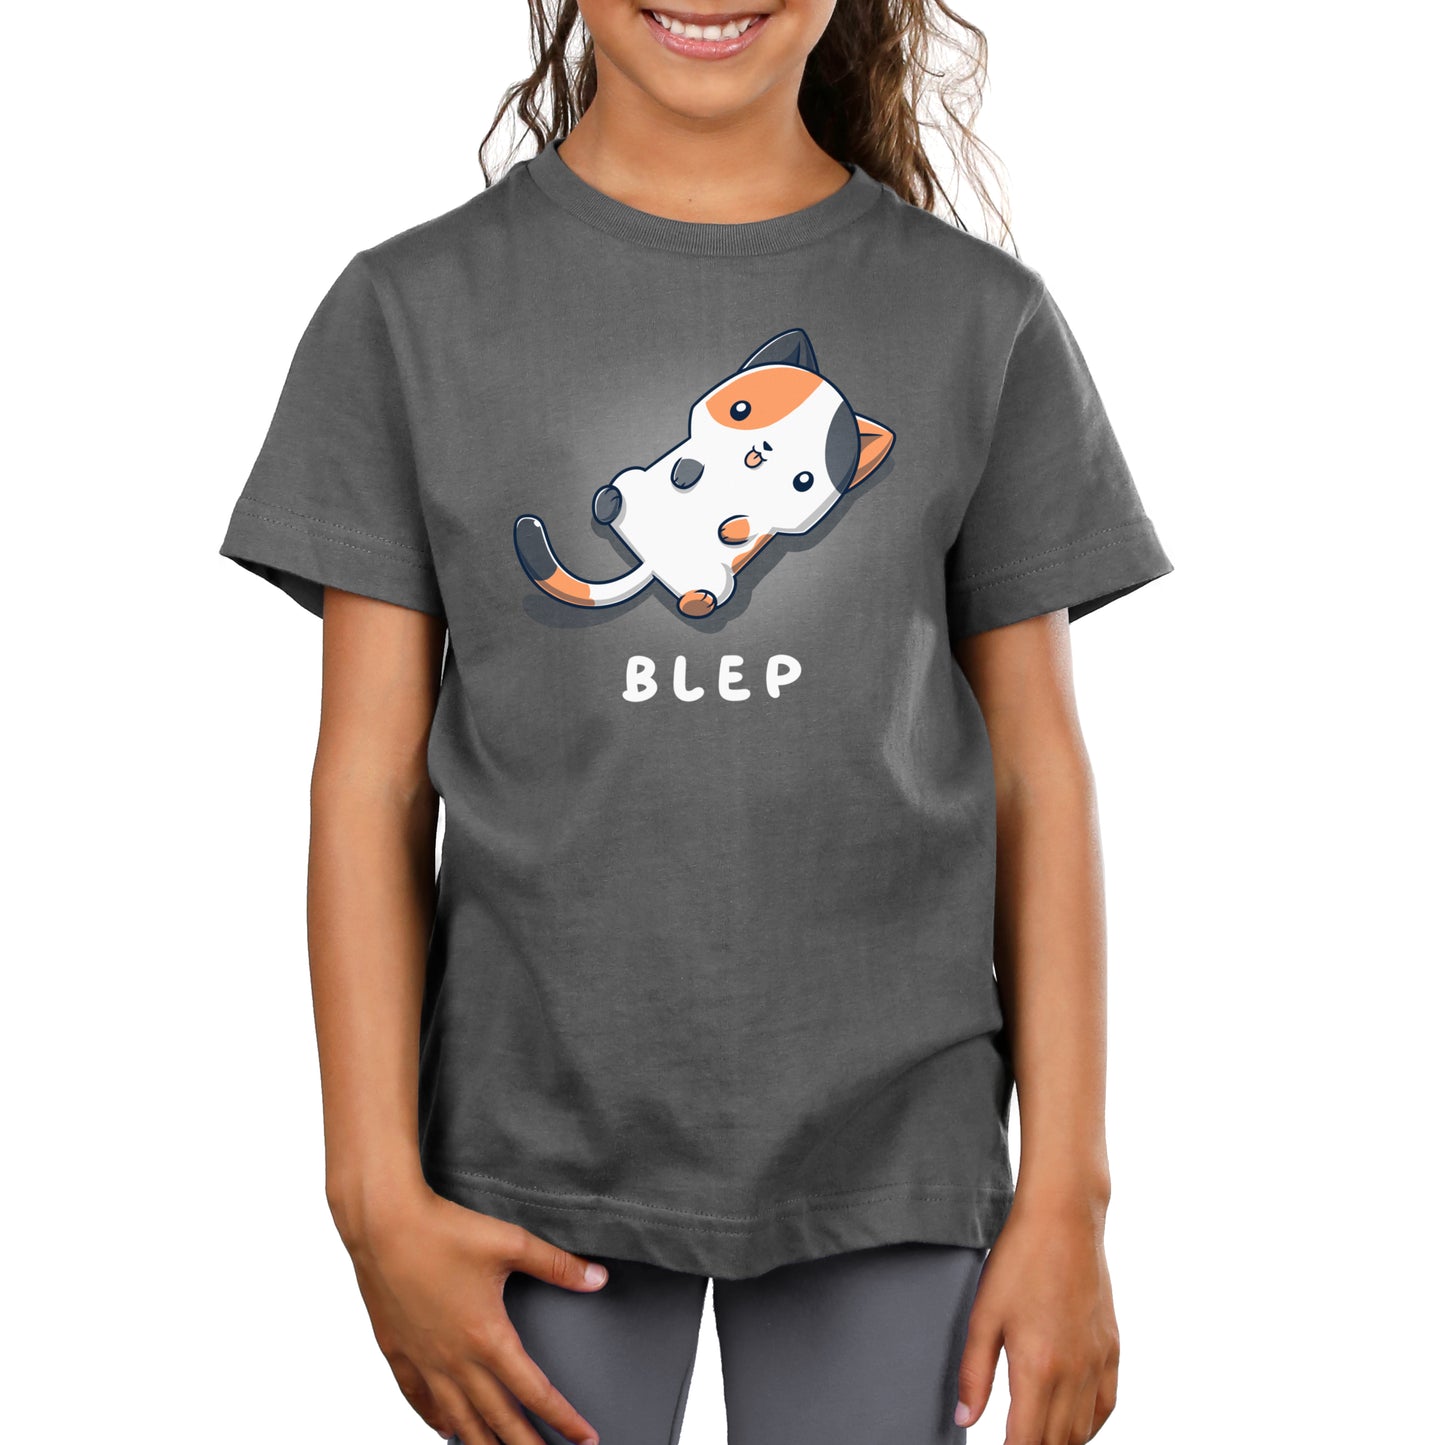 A girl wearing a charcoal gray t-shirt that says Blep Kitty by TeeTurtle.